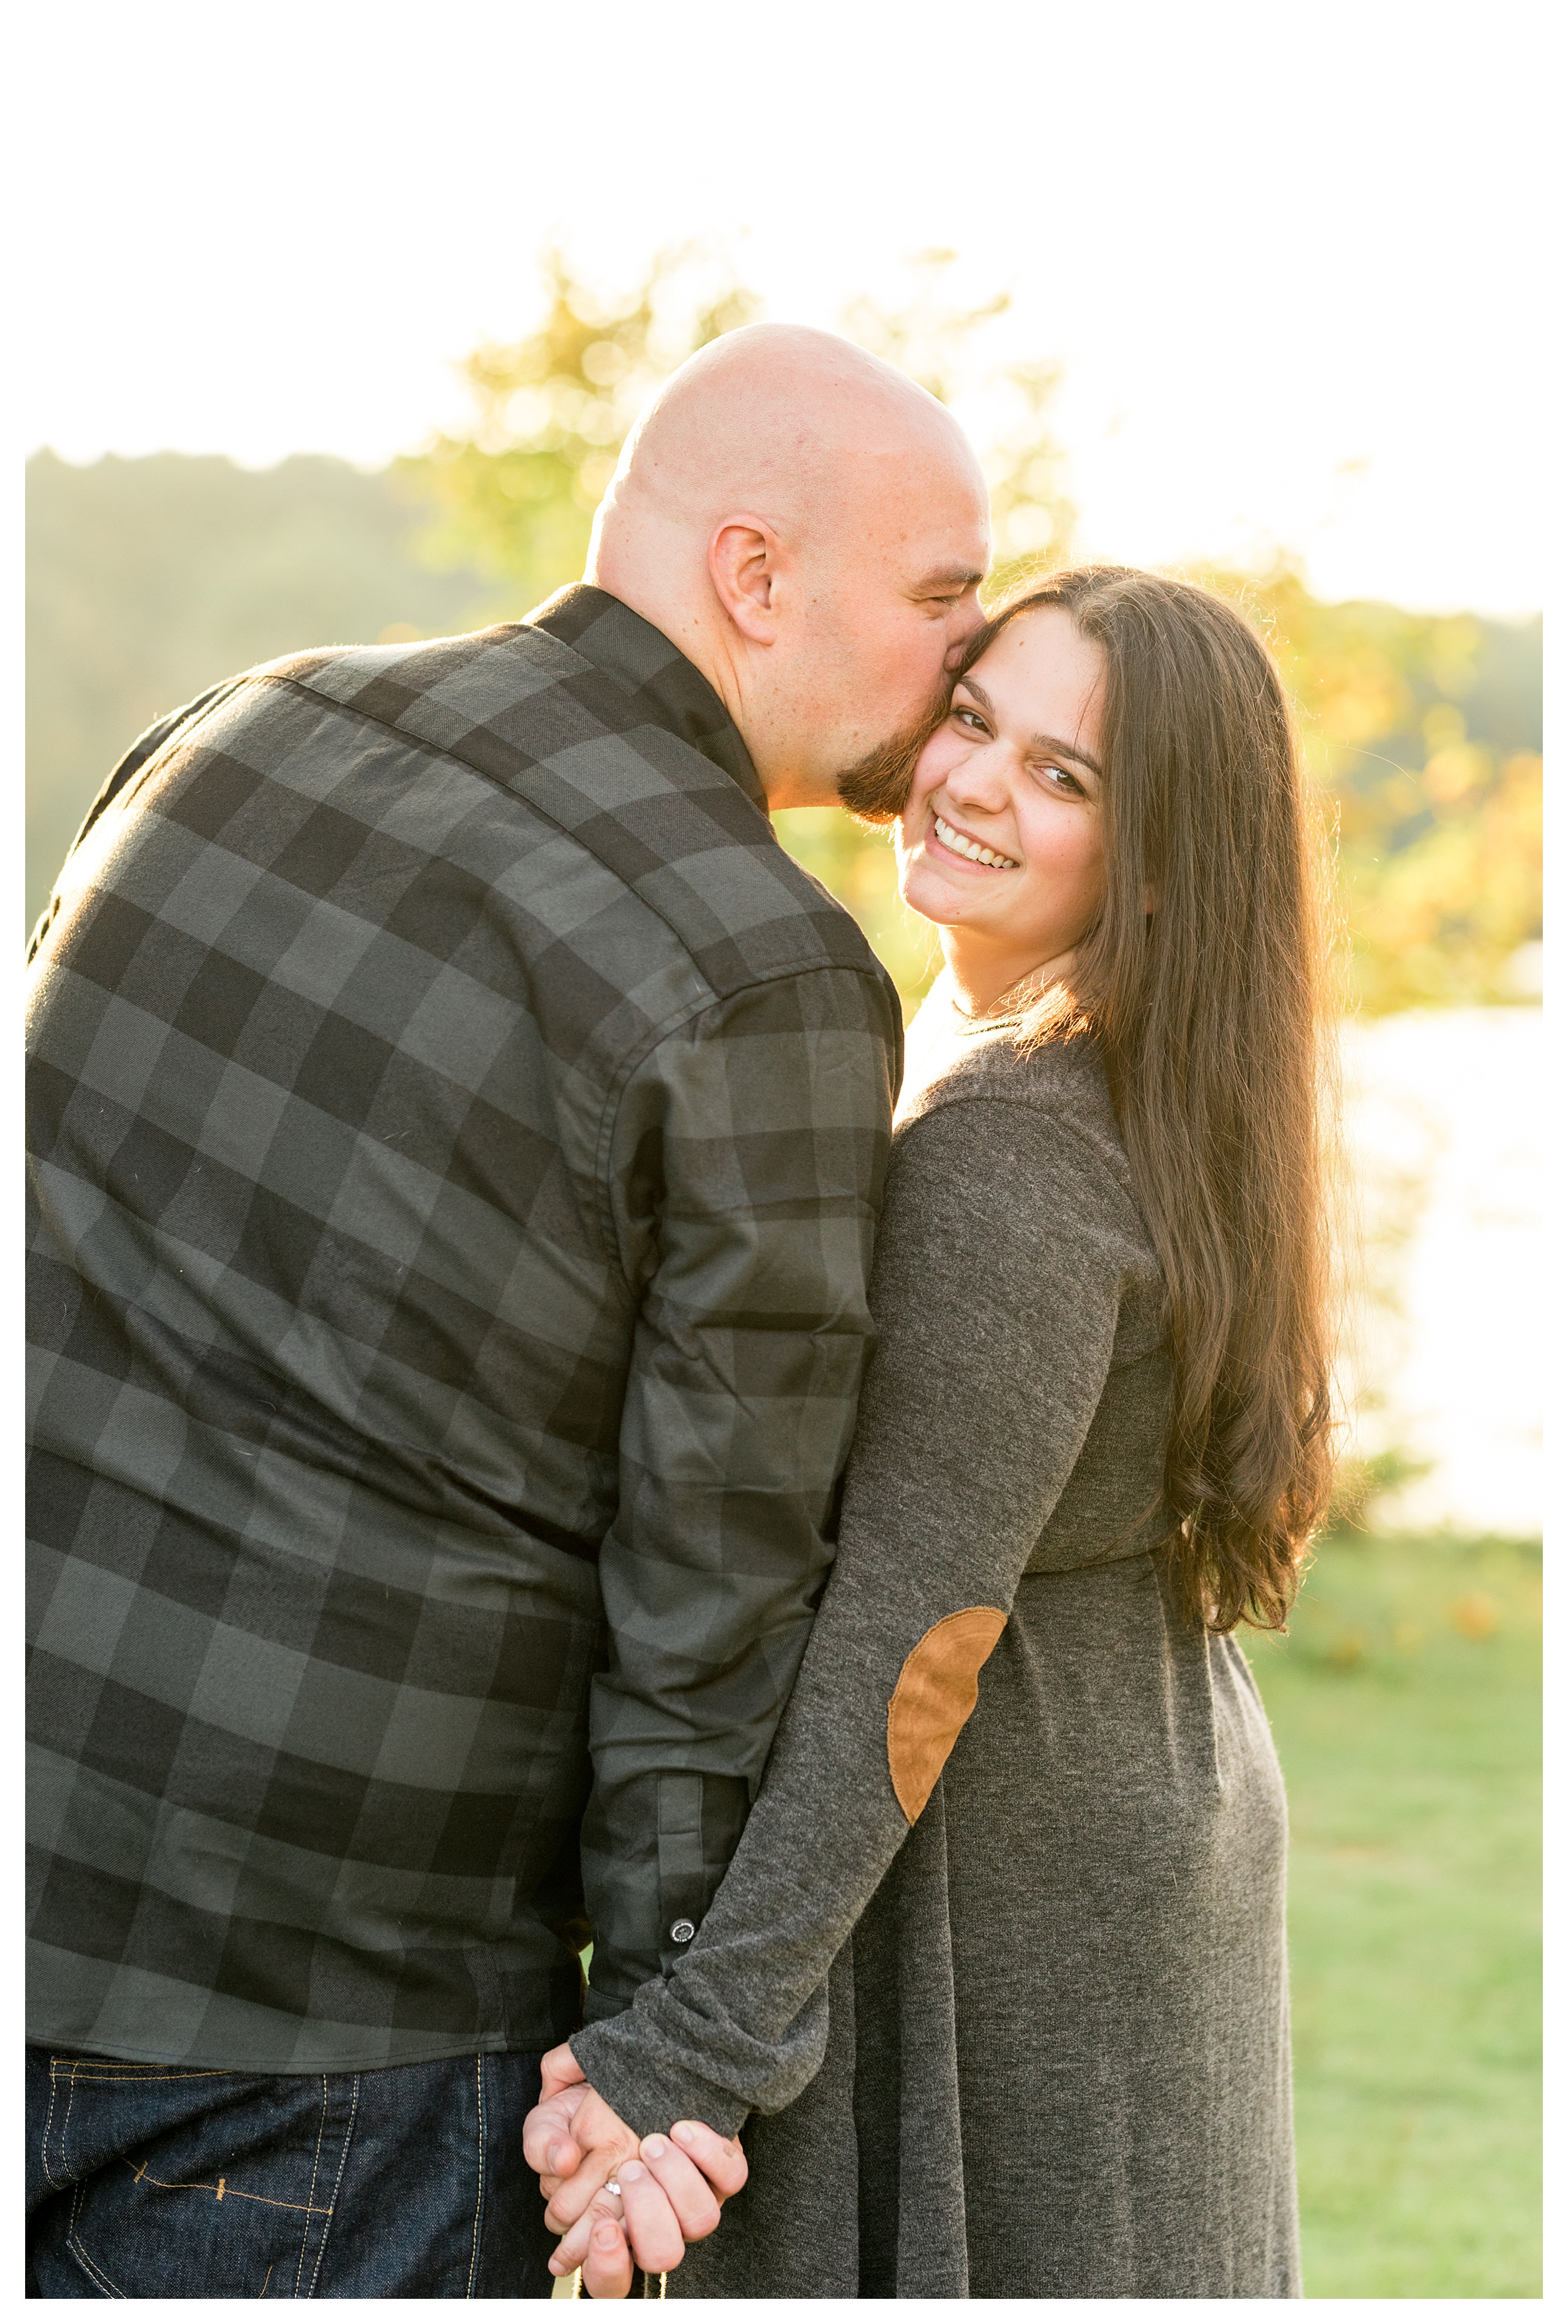 Old Stone Church Engagement